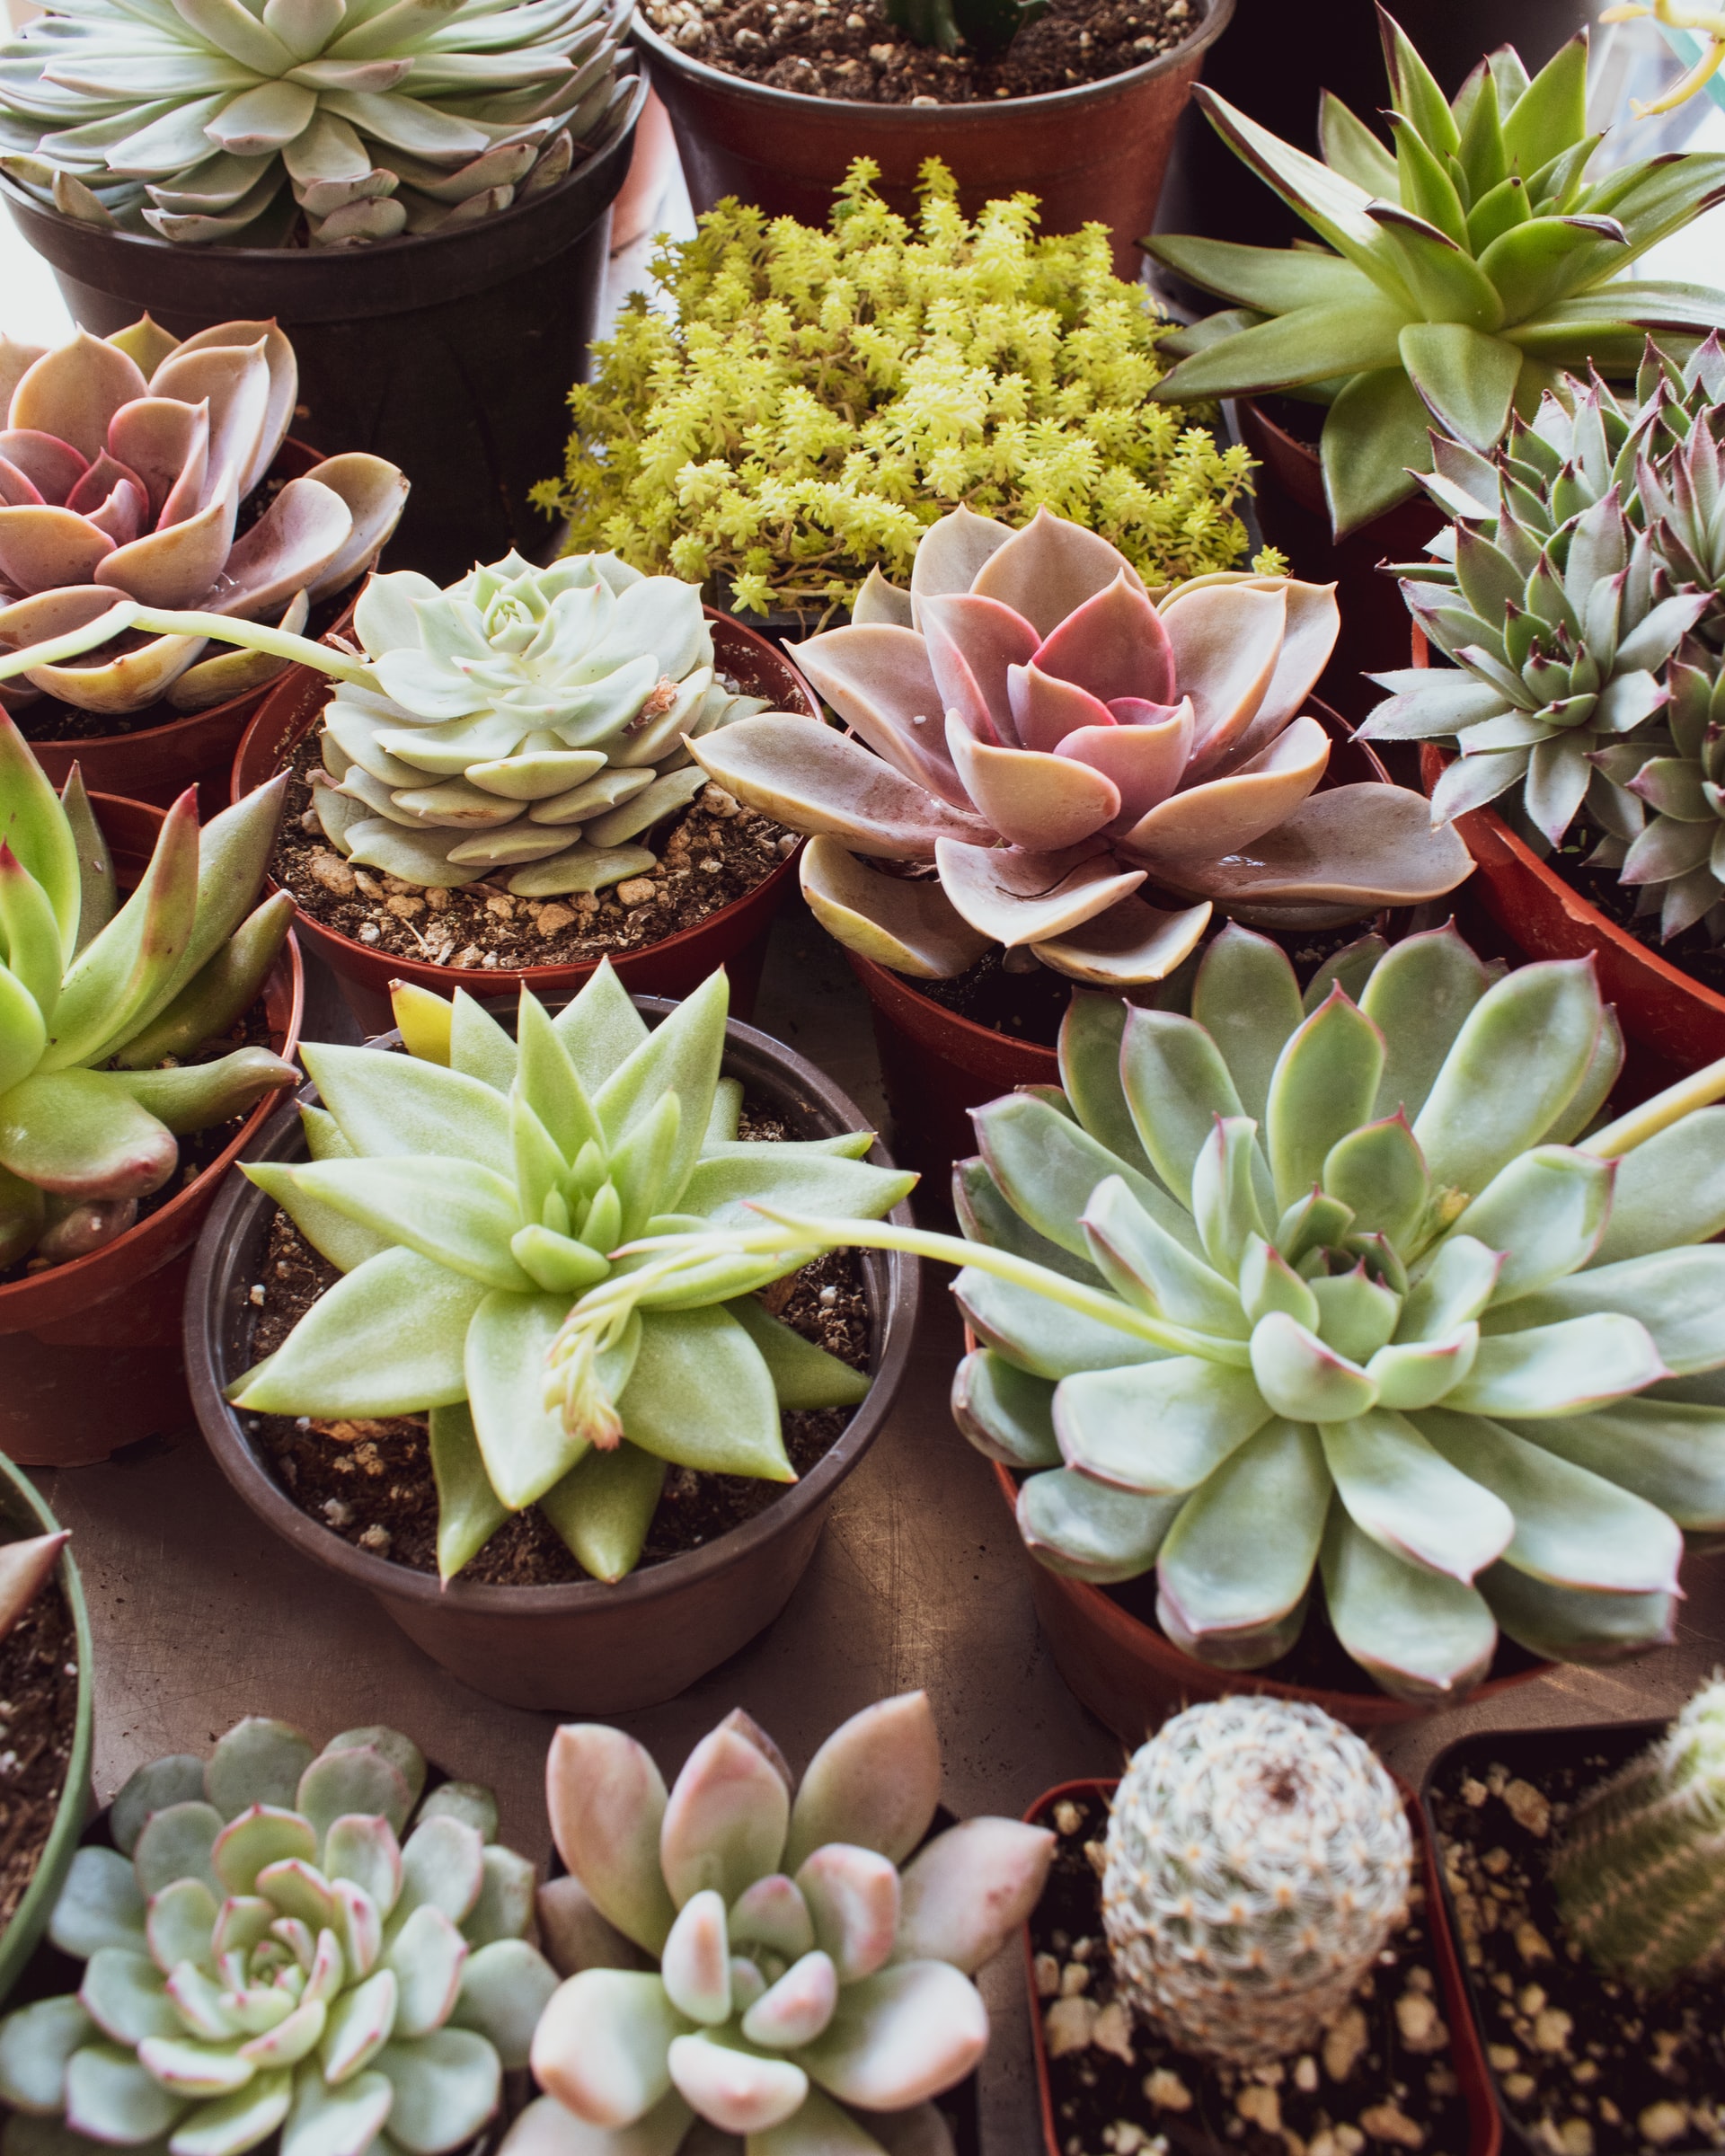 A variety of succulent plants of different colors, shapes, and sizes planted in different pots